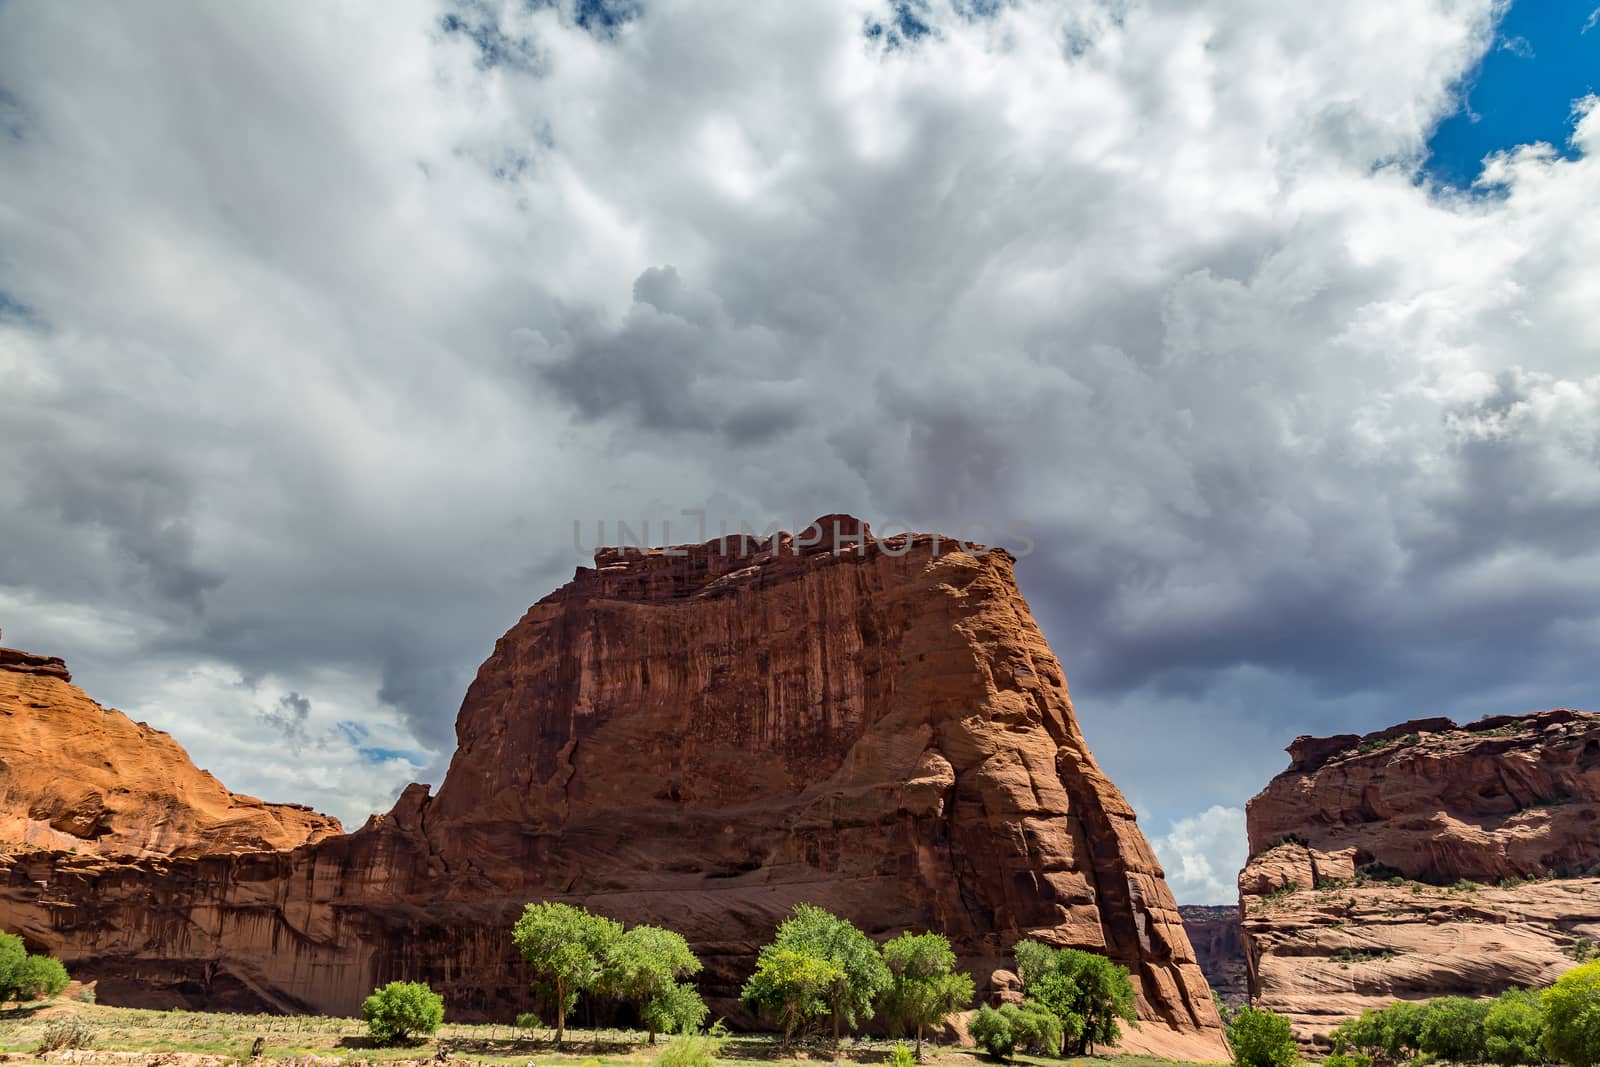 The Canyon de Chelly National Monument consists of many well-preserved Anasazi ruins and spectacular sheer red cliffs that rise up to 1000 feet.